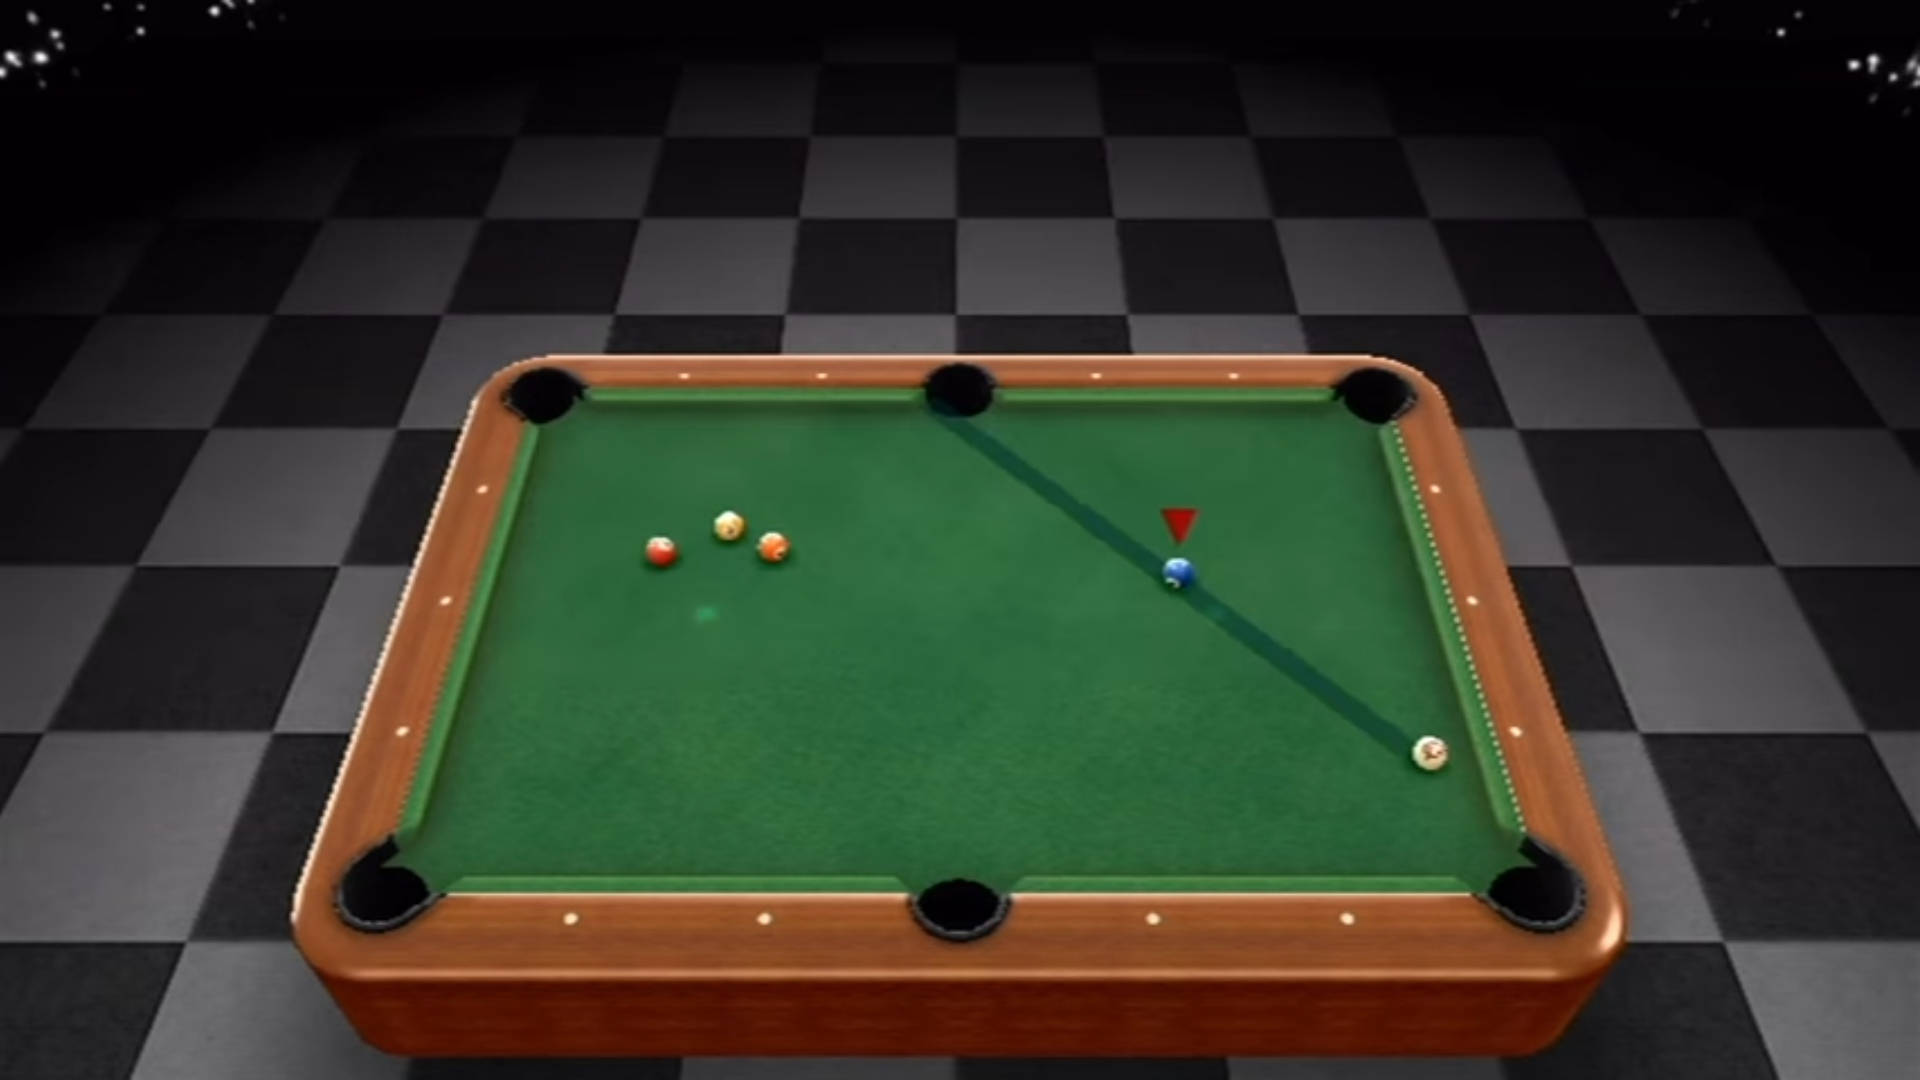 Classic Billiard Pool Table on a Checkered Floor Wallpaper